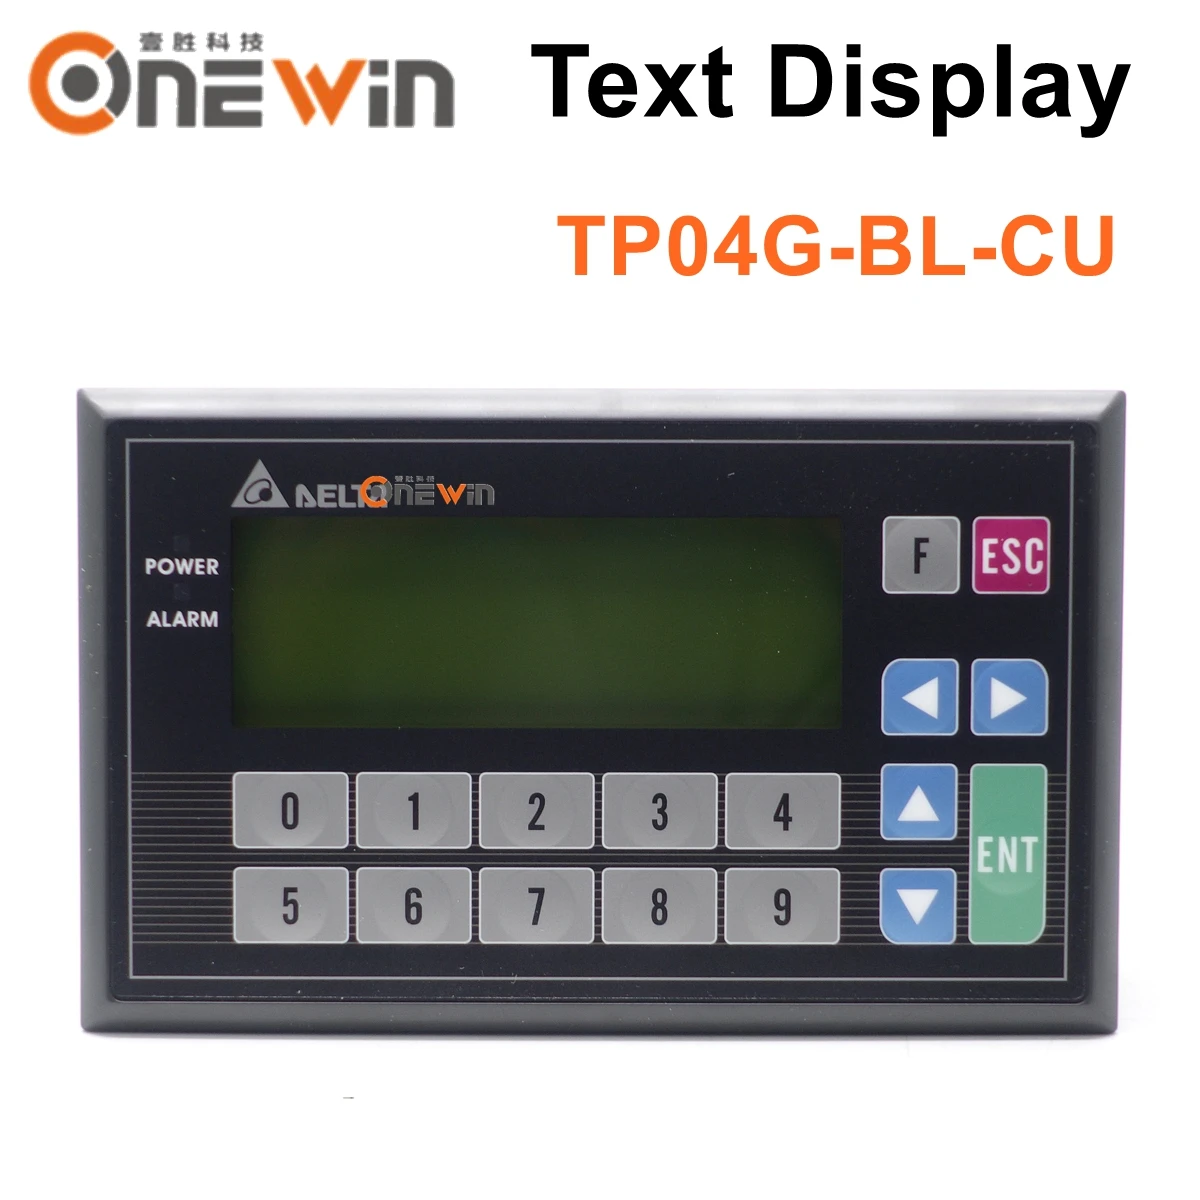 

TP04G-BL-CU Text Panel display Delta HMI 4.1 inch STN LCD single color 4 Lines Display model USB Download only